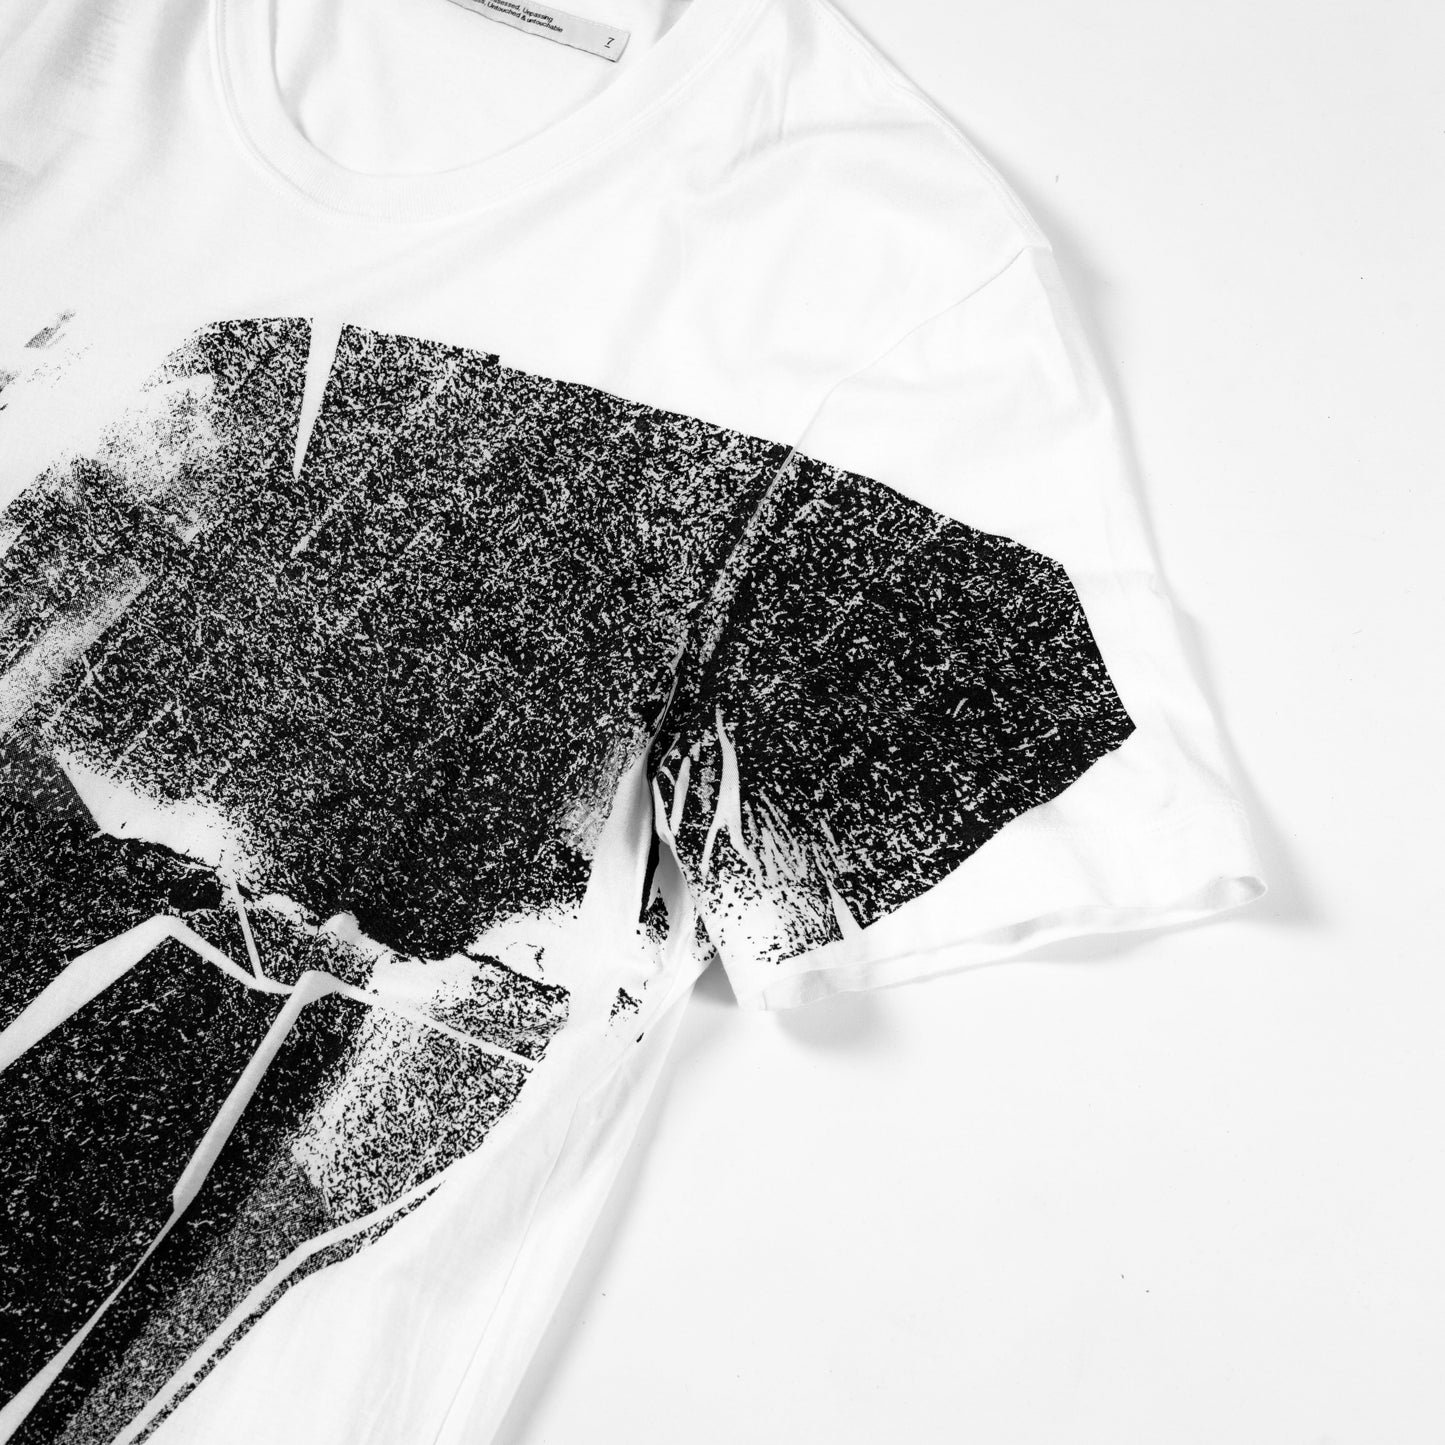 Abstract Printed T-Shirt, White